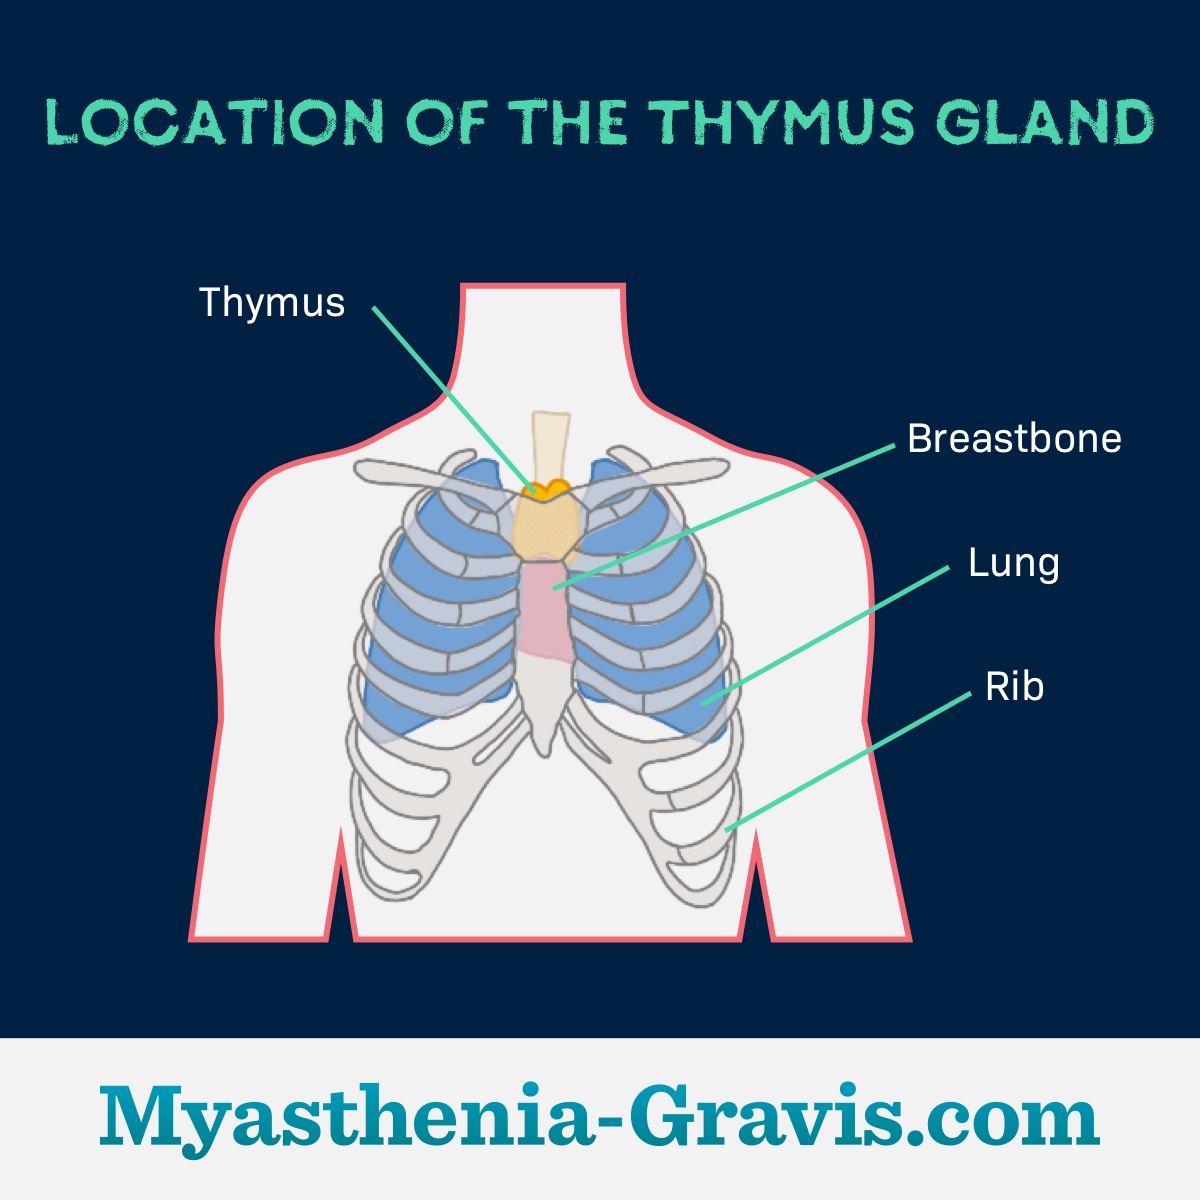 Diagram of human chest showing the thymus, breastbone, lung, and ribs.